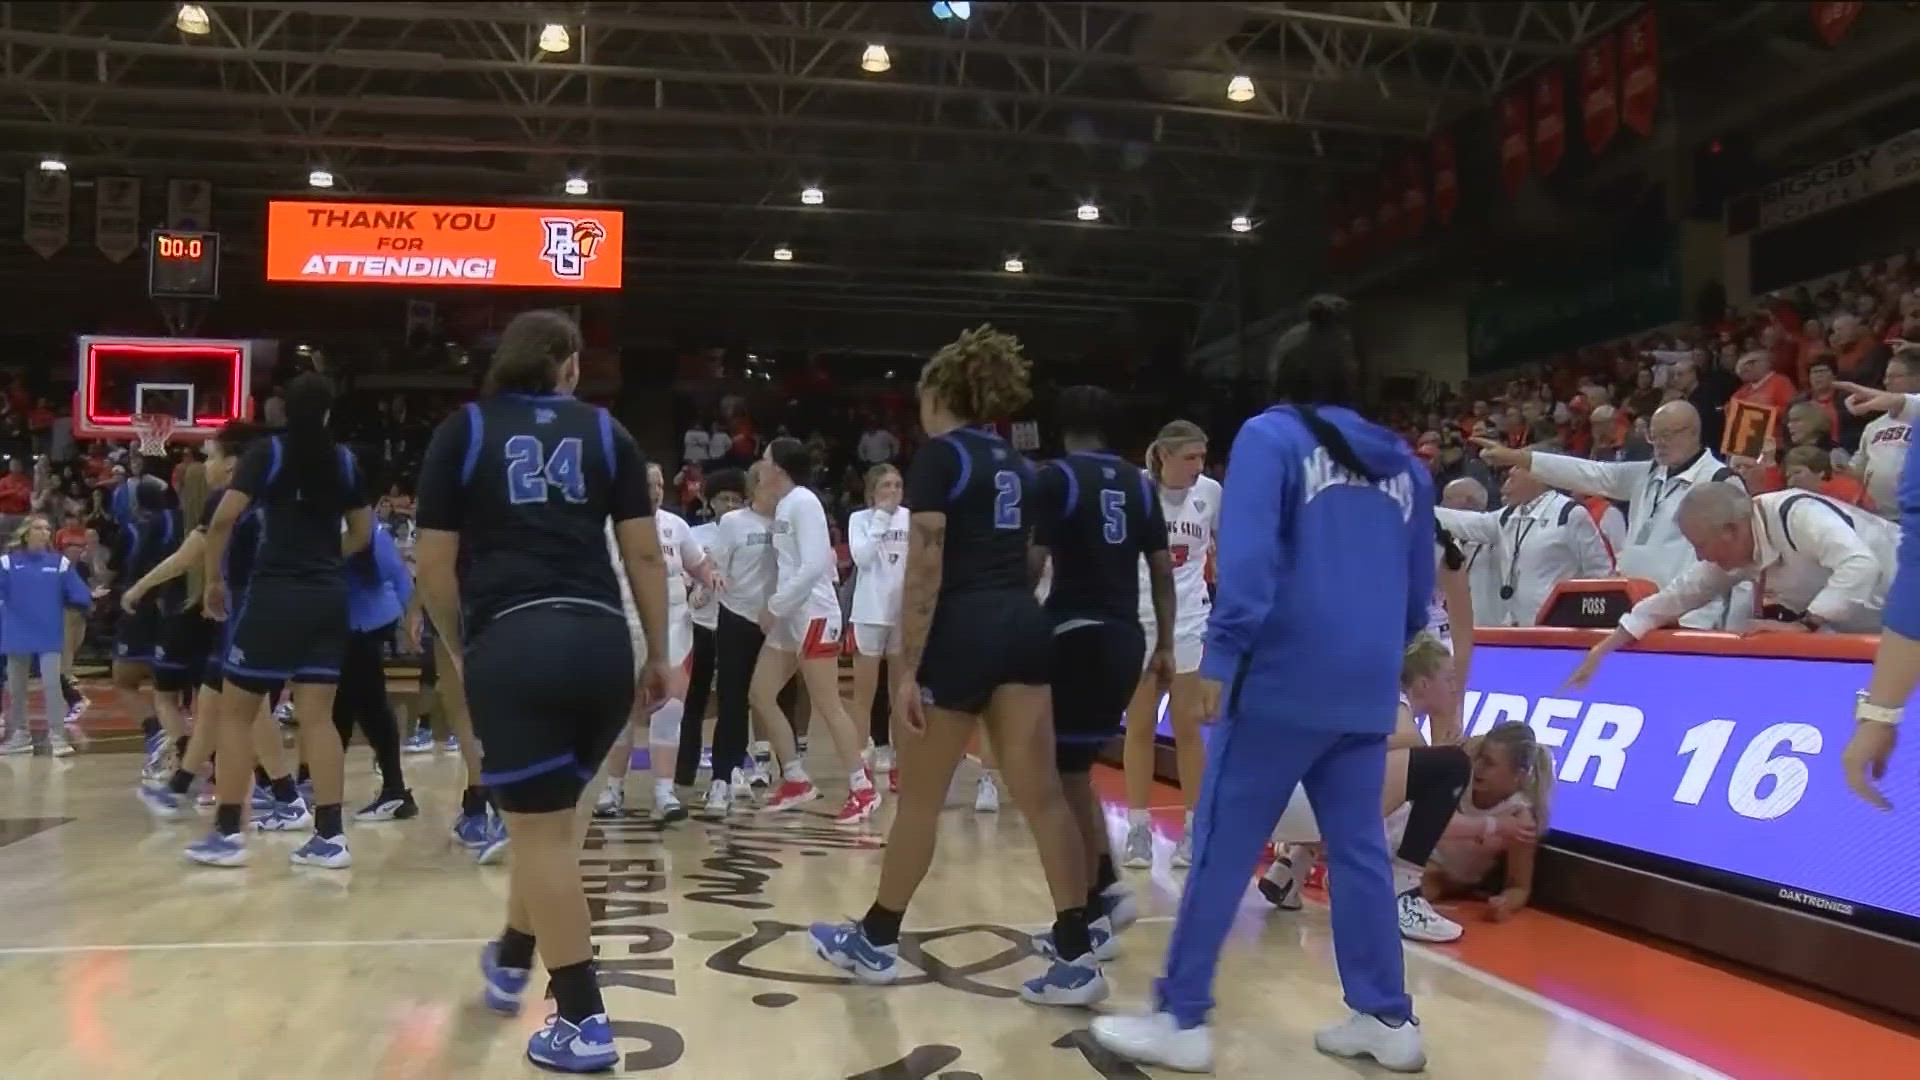 Memphis' Jamirah Shutes and BGSU's Elissa Brett appeared to exchange words in the handshake line after the game before Shutes punched Brett.